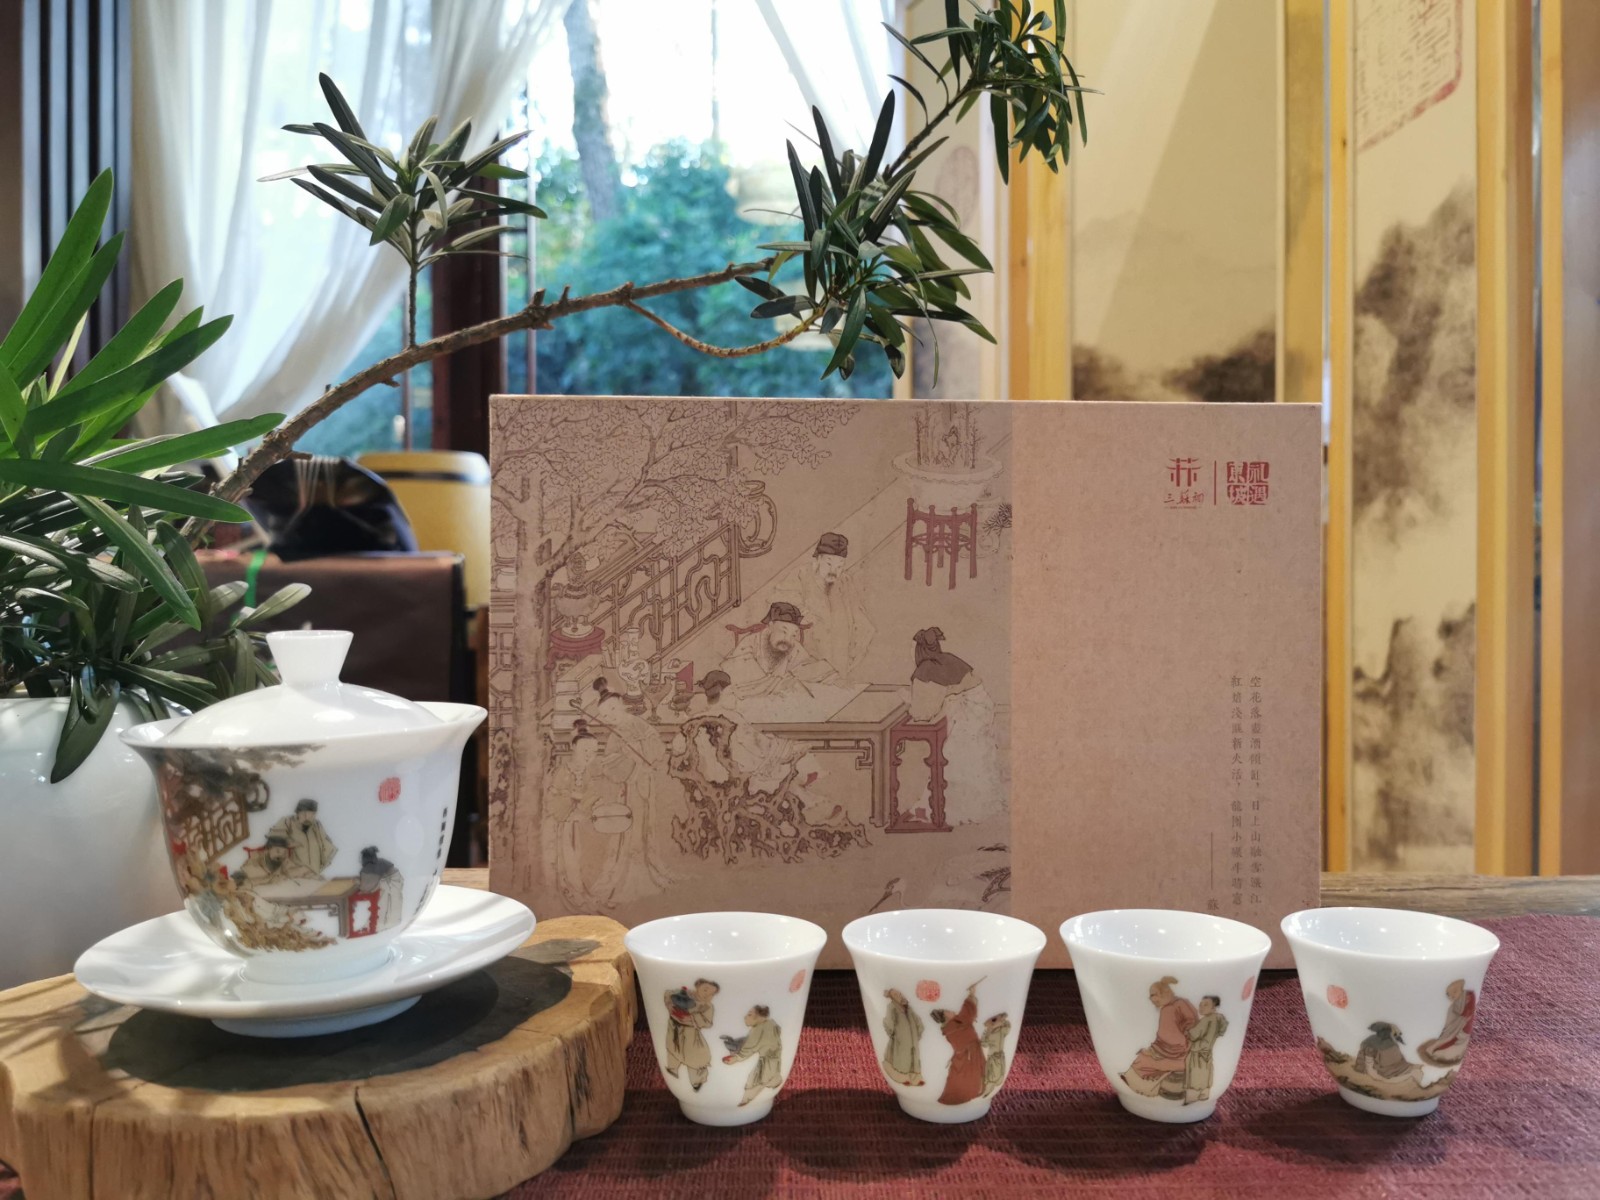 Teaware Themed with Scholar Gathering in the Western Garden 